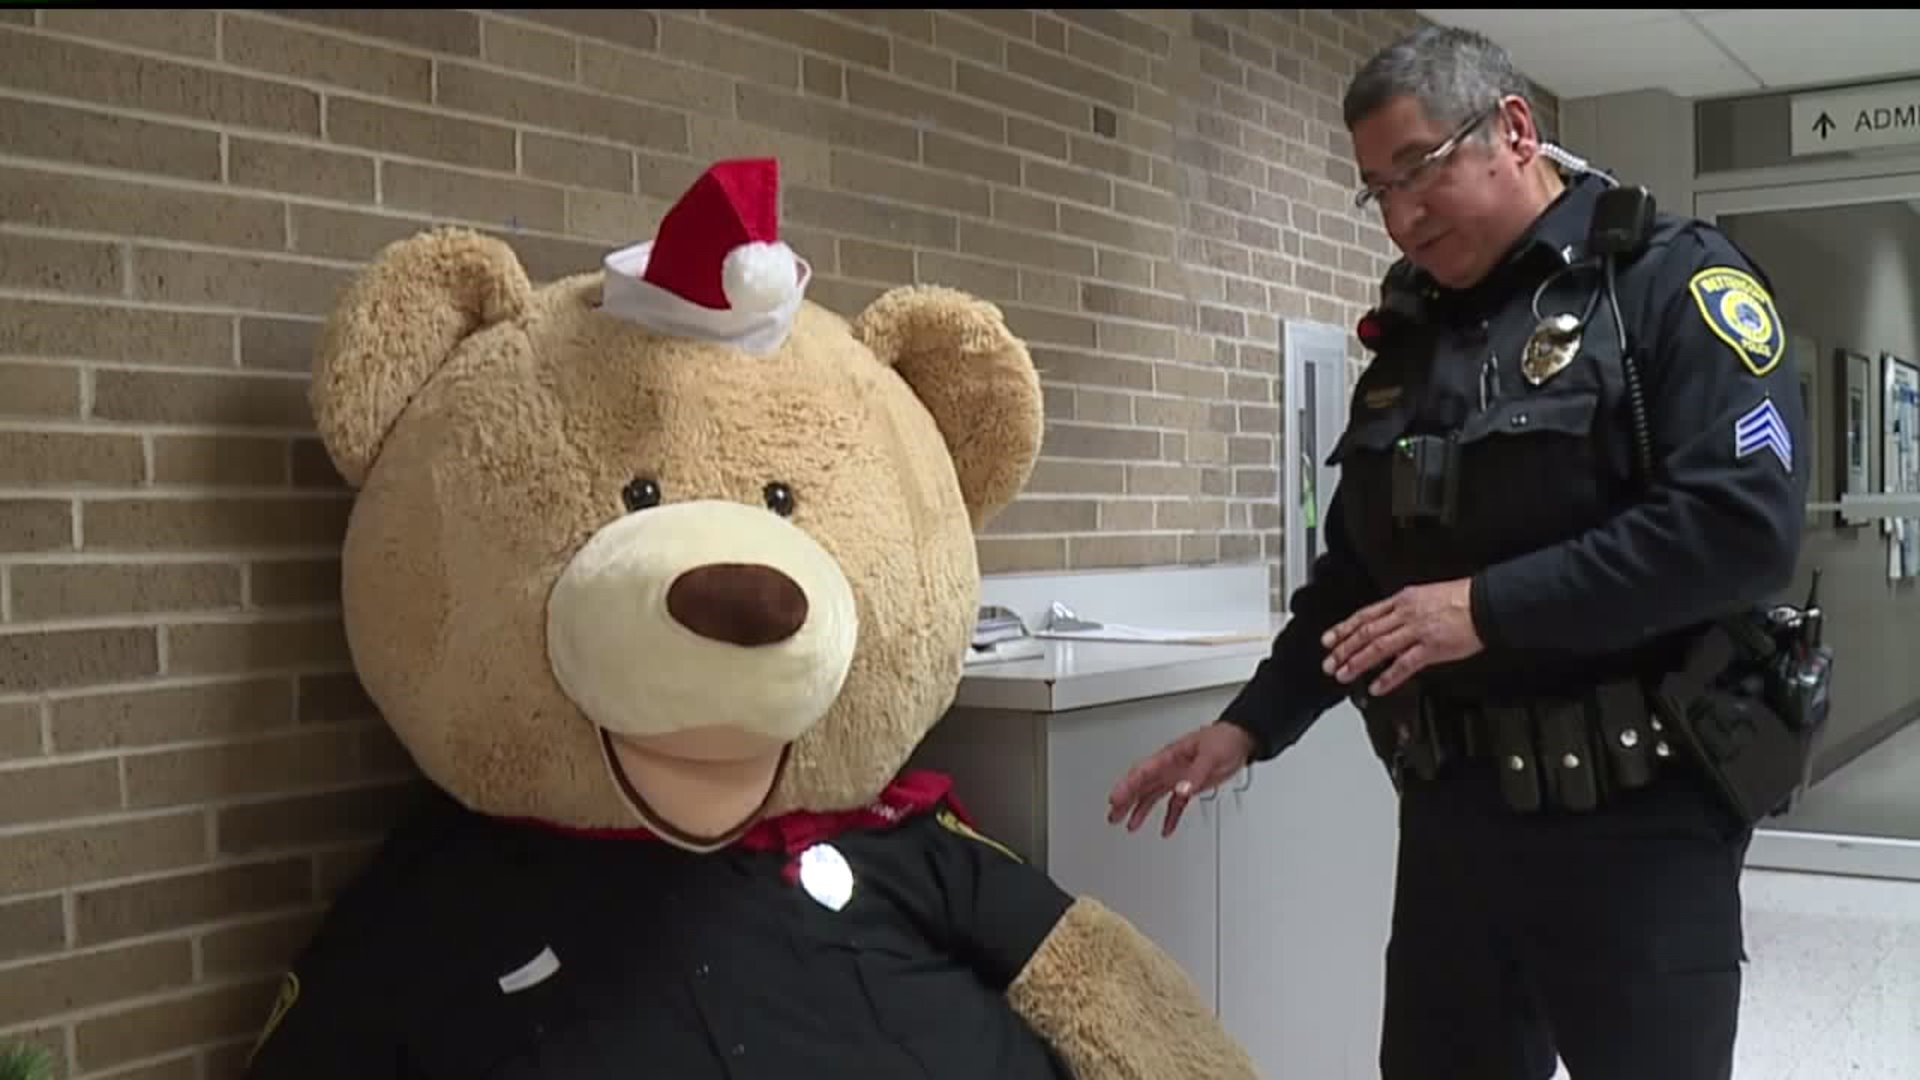 Honorary Bettendorf Police Officer gets help suiting up